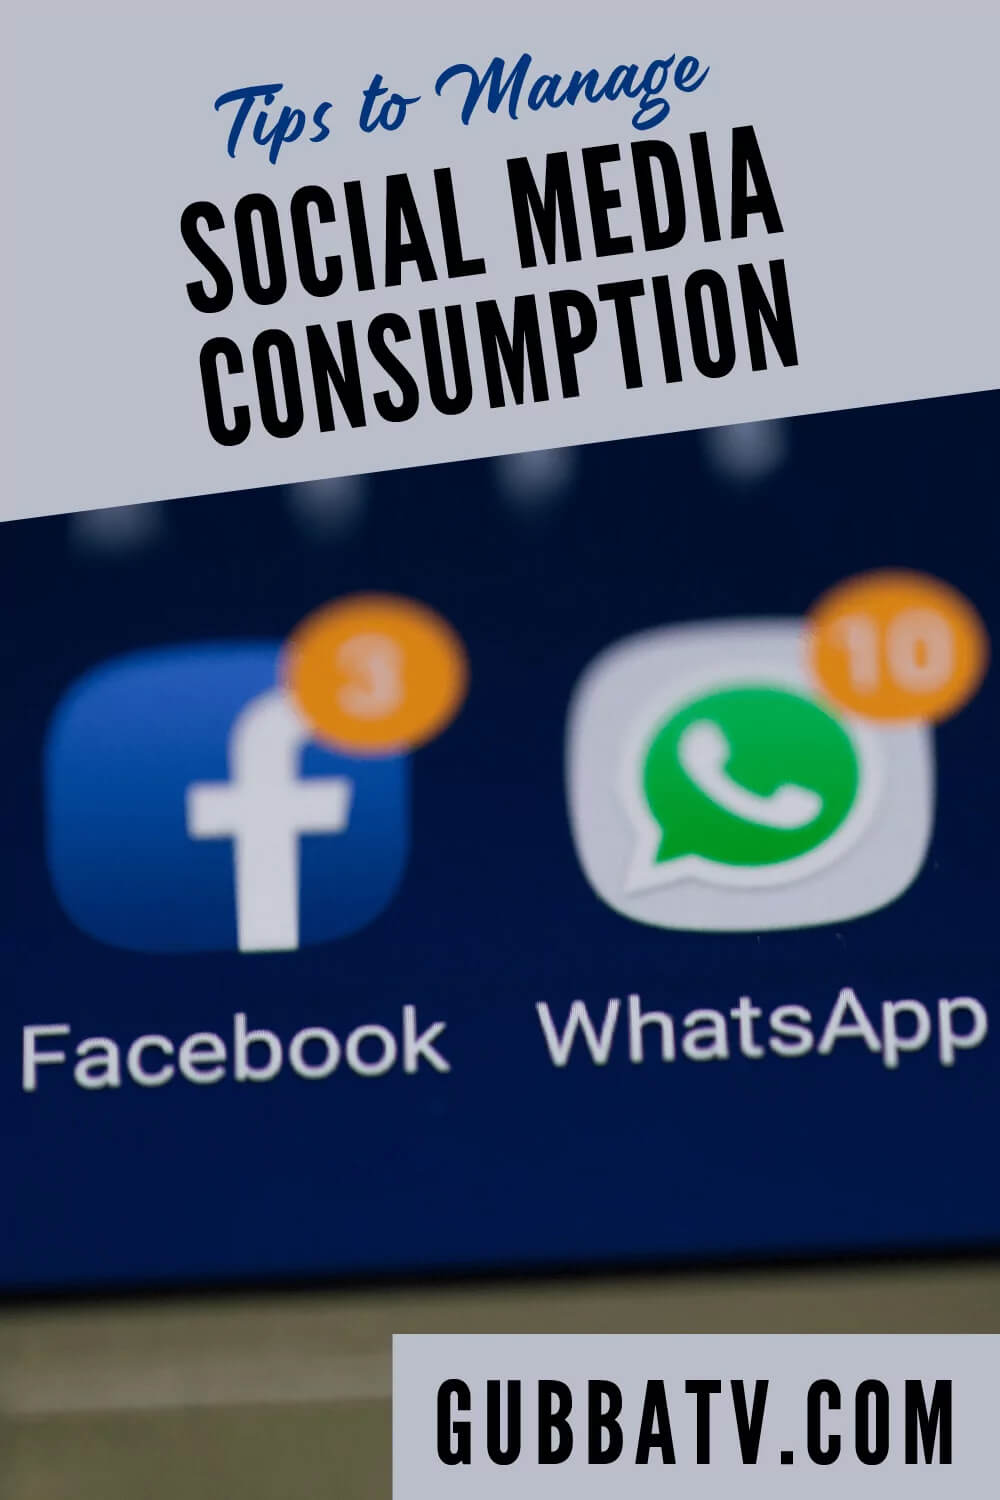 Tips to Manage Social Media Consumption